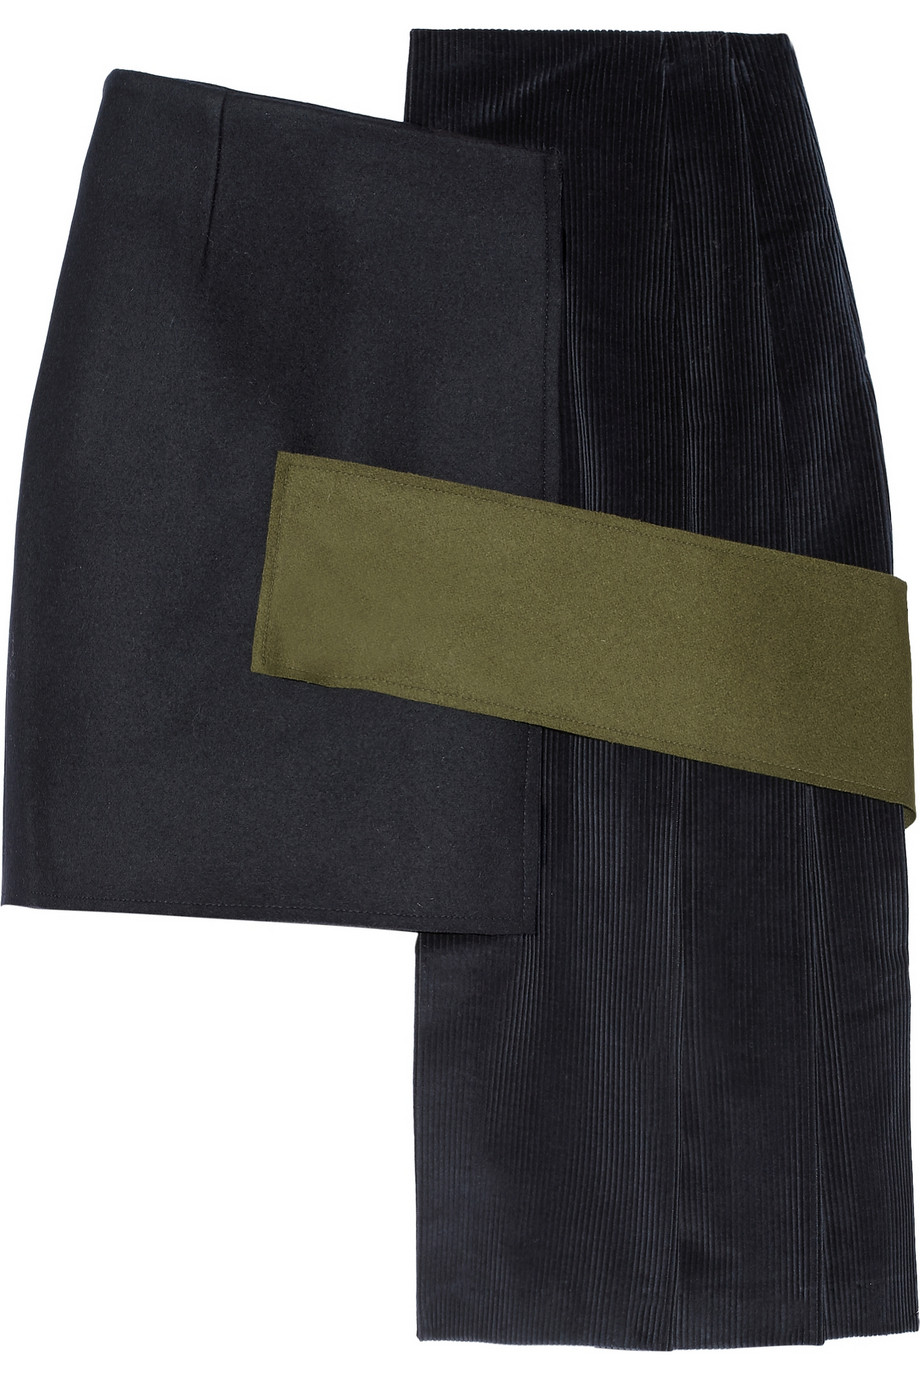   Jacquemus  skirt - was $550, now $275 